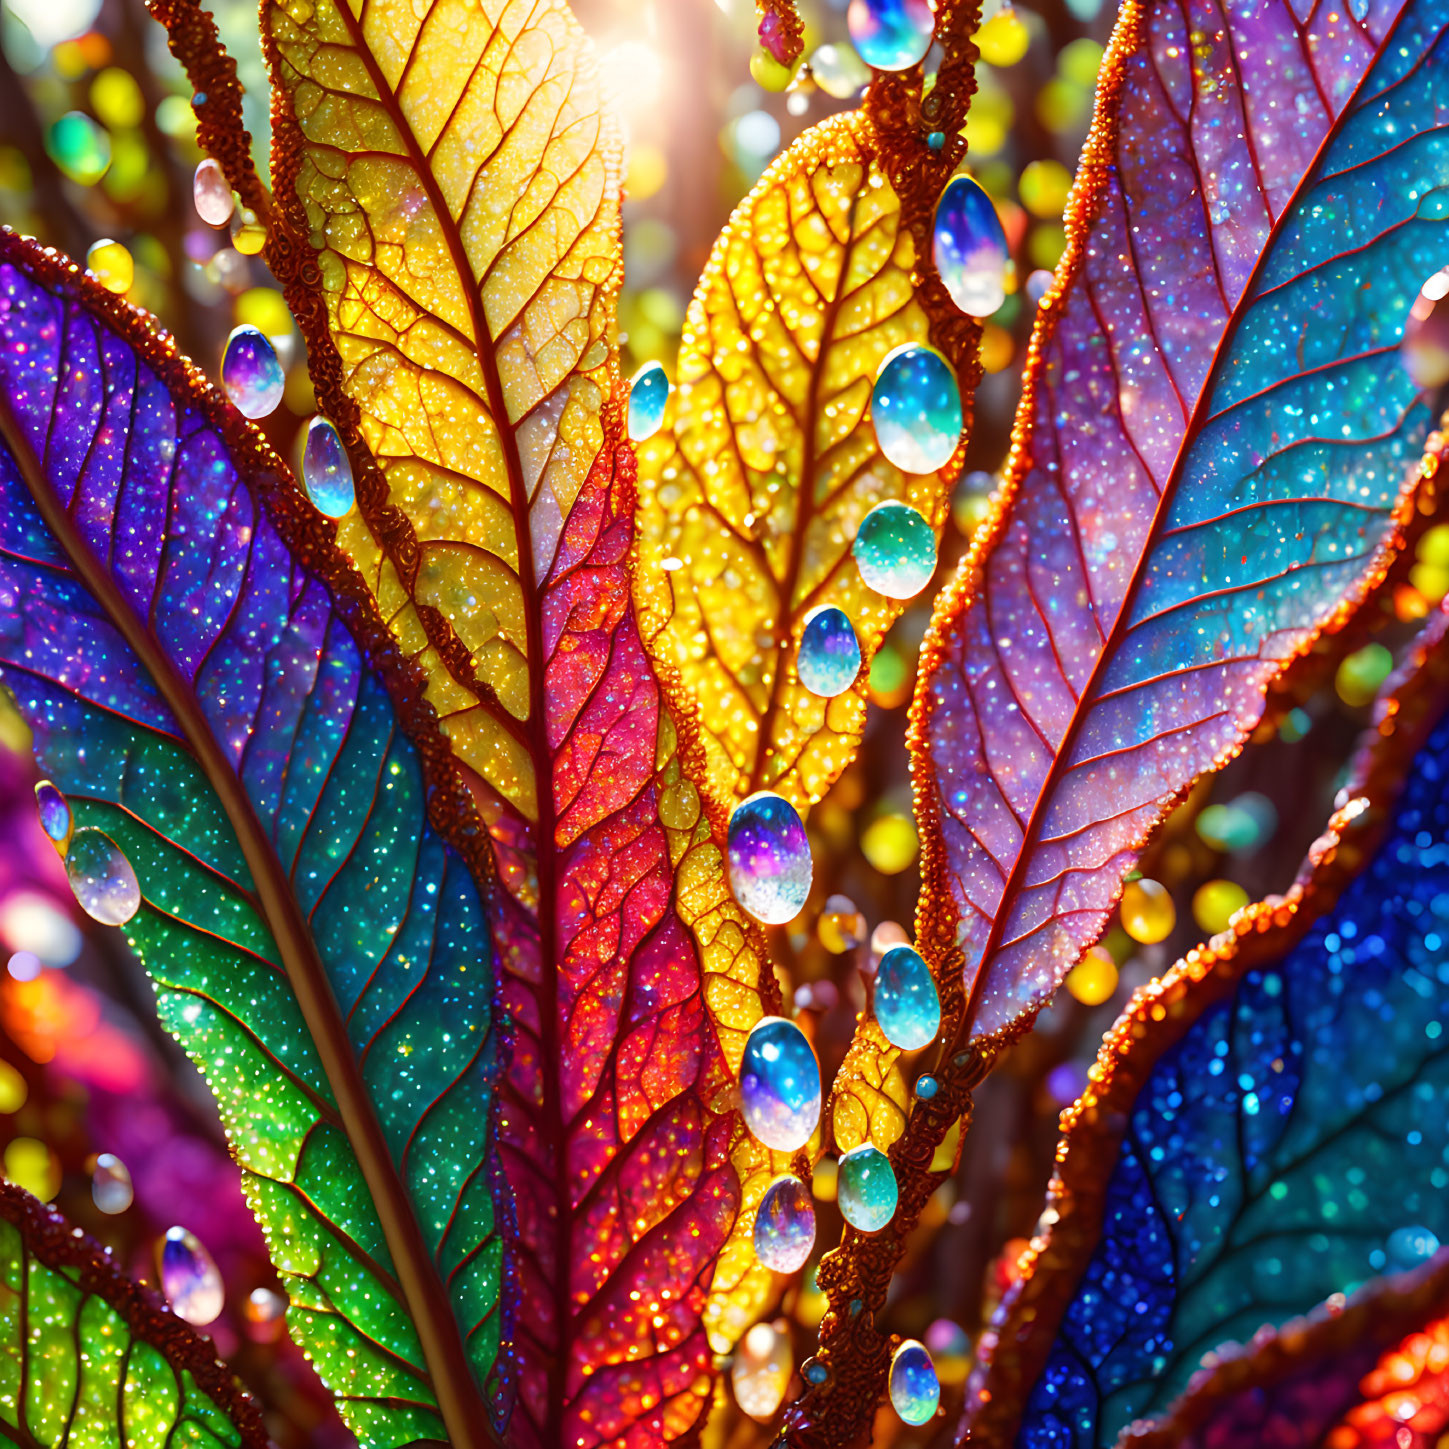 Colorful Dewy Leaves Reflecting Light in Magical Scene